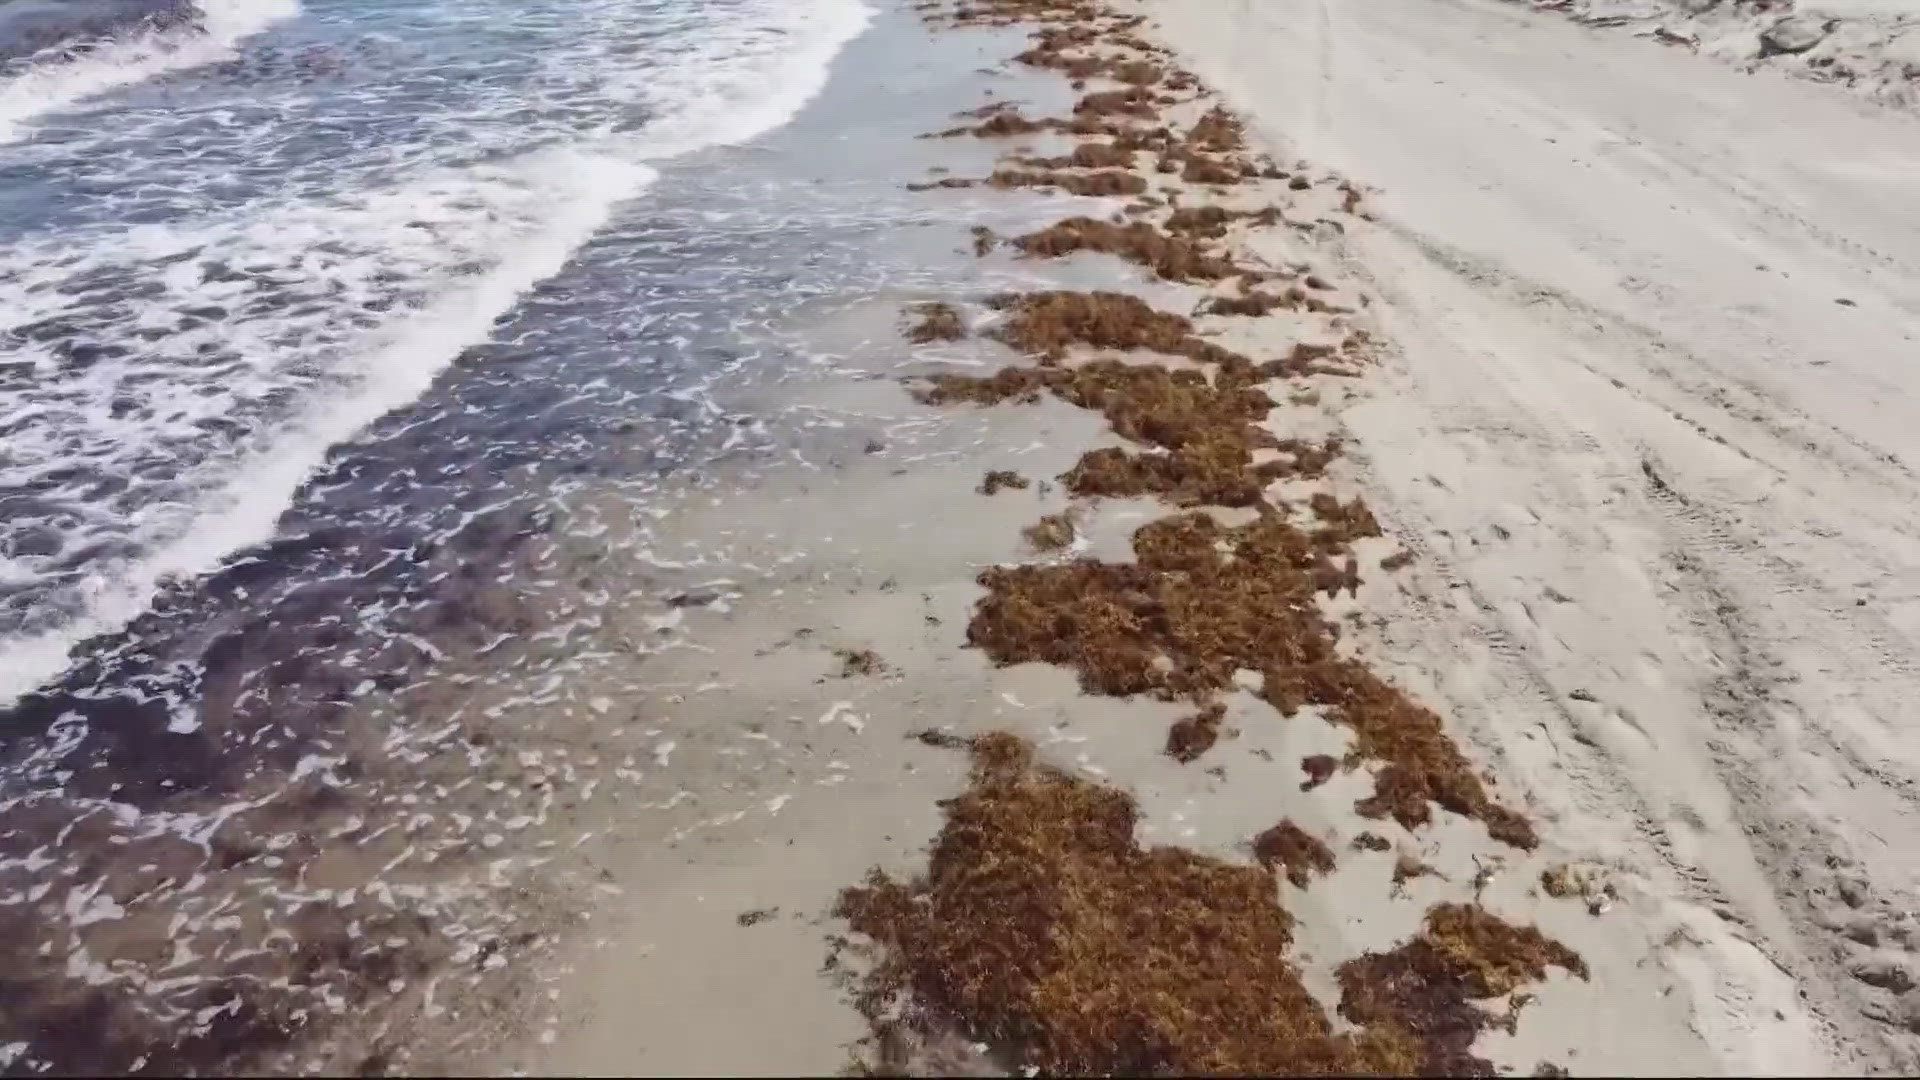 Jacksonville University professor, Anthony Ouellette, says people with liver and kidney diseases and open wounds should be careful around the brown seaweed.